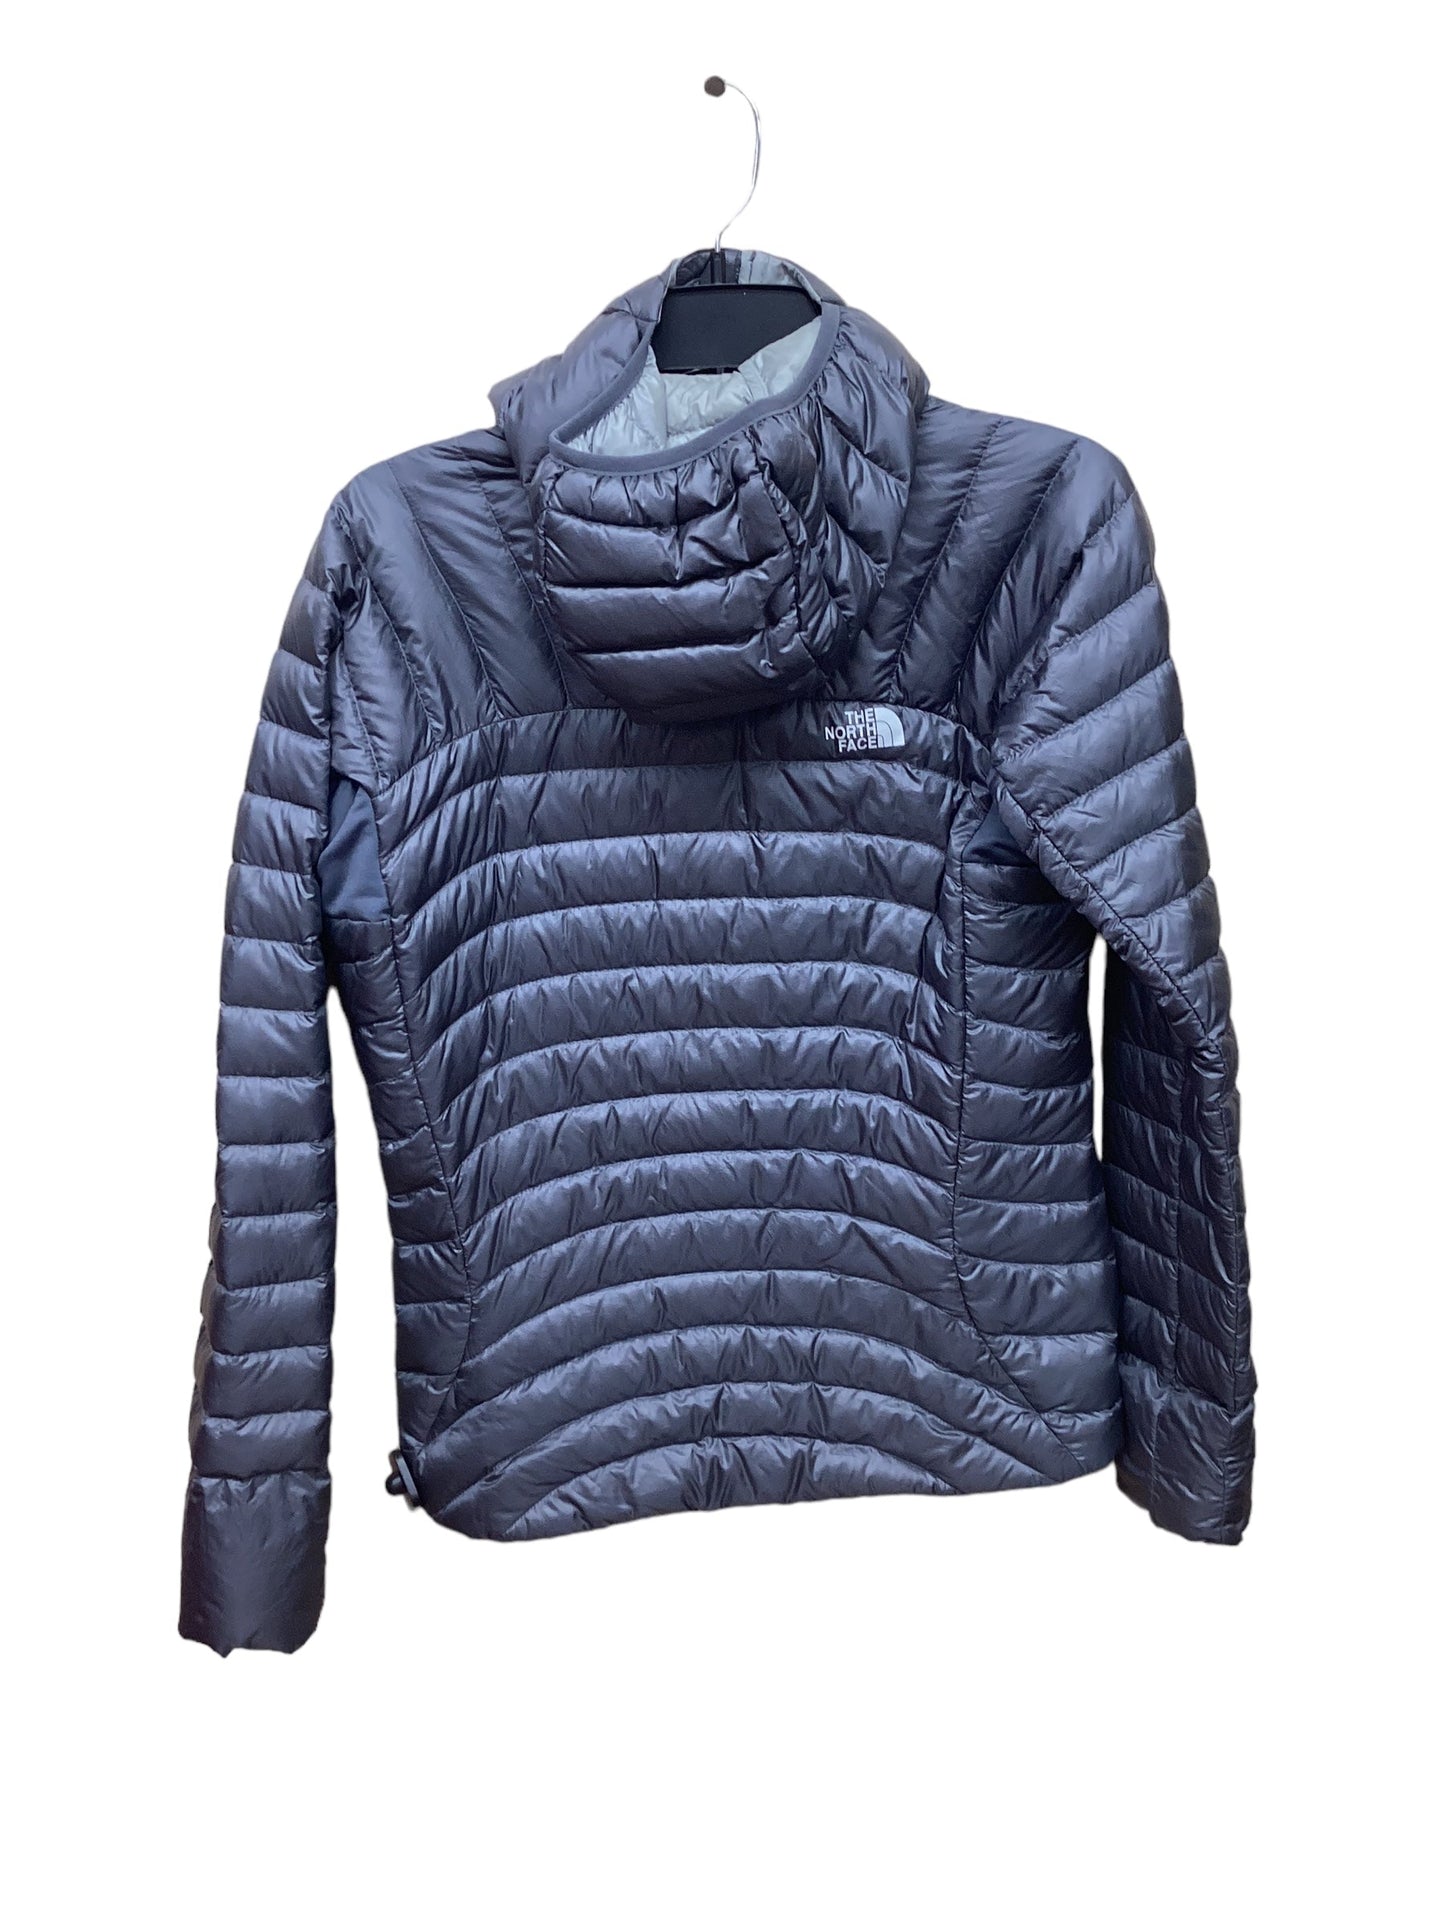 Grey Jacket Puffer & Quilted The North Face, Size S